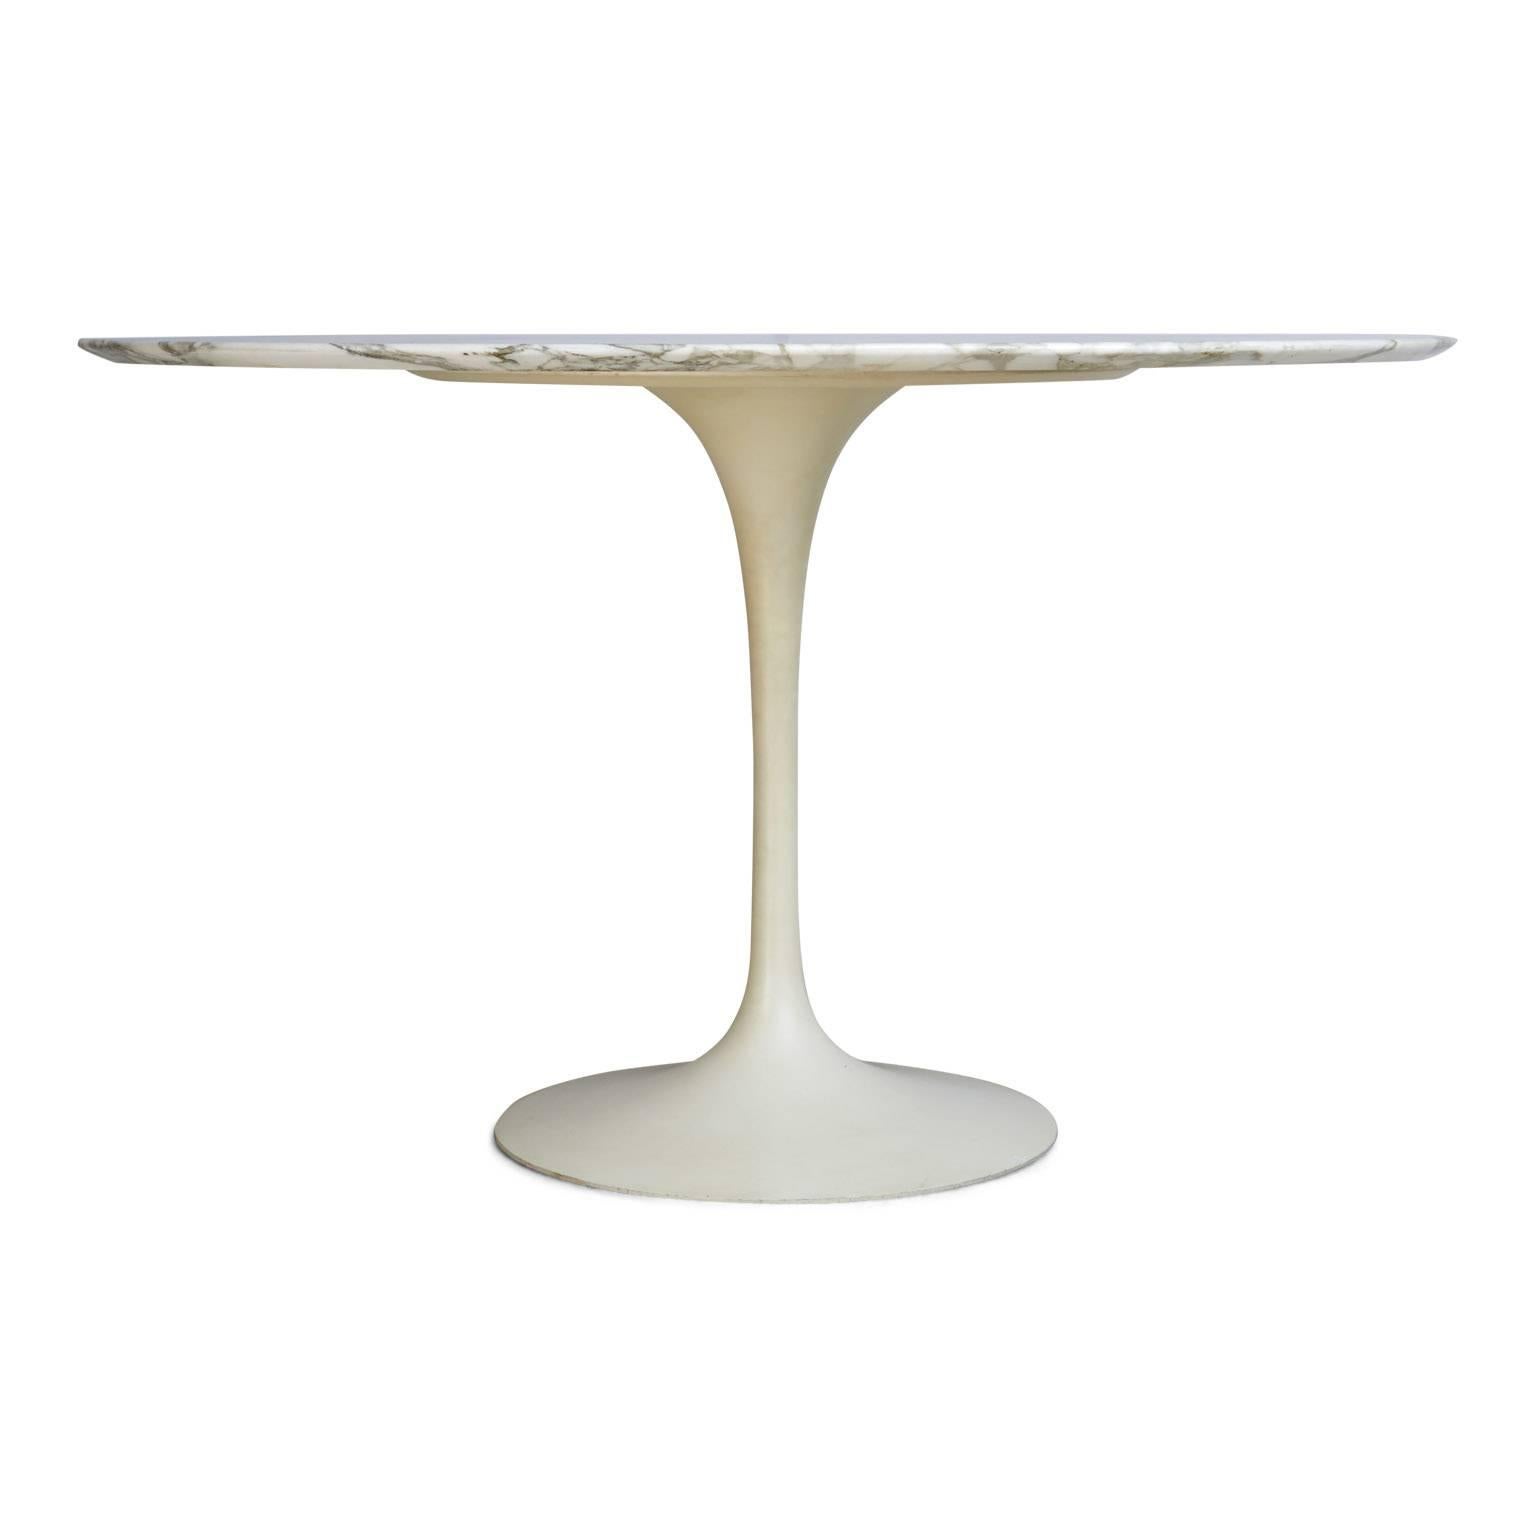 One of the most highly coveted vintage items at present, this elegant dining table designed by Eero Saarinen in 1954 for Knoll features a broad circular top of Carrara marble supported by a cast aluminum tulip base finished in white Rilsan. This